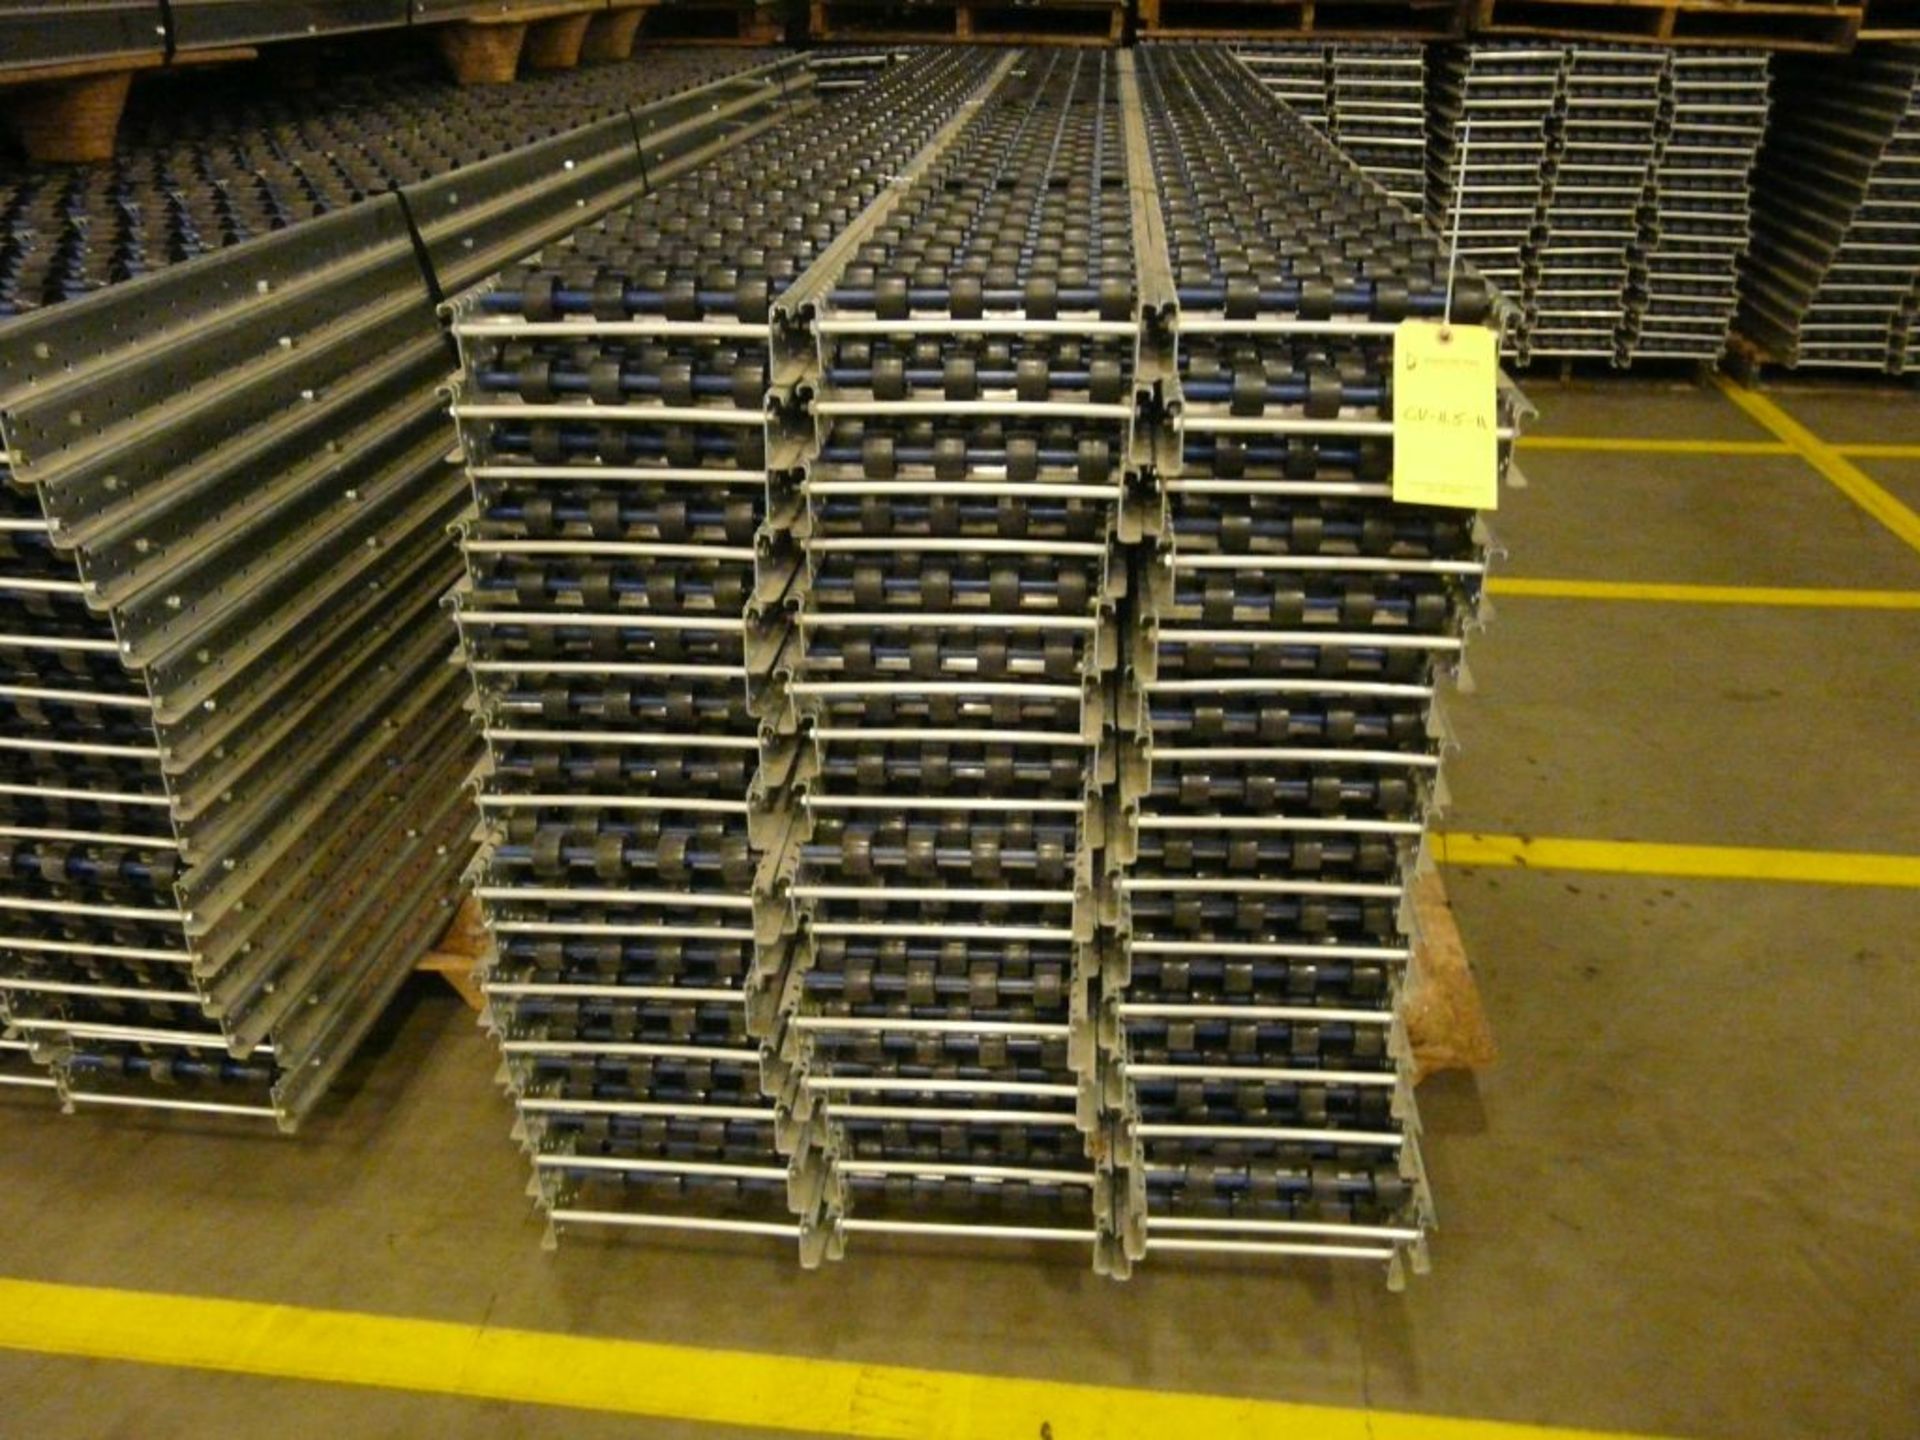 Lot of (90) SpanTrack Wheelbed Carton Flow Conveyors - 11.5'L x 11"W; Tag: 223624 - $30 Lot - Image 2 of 4